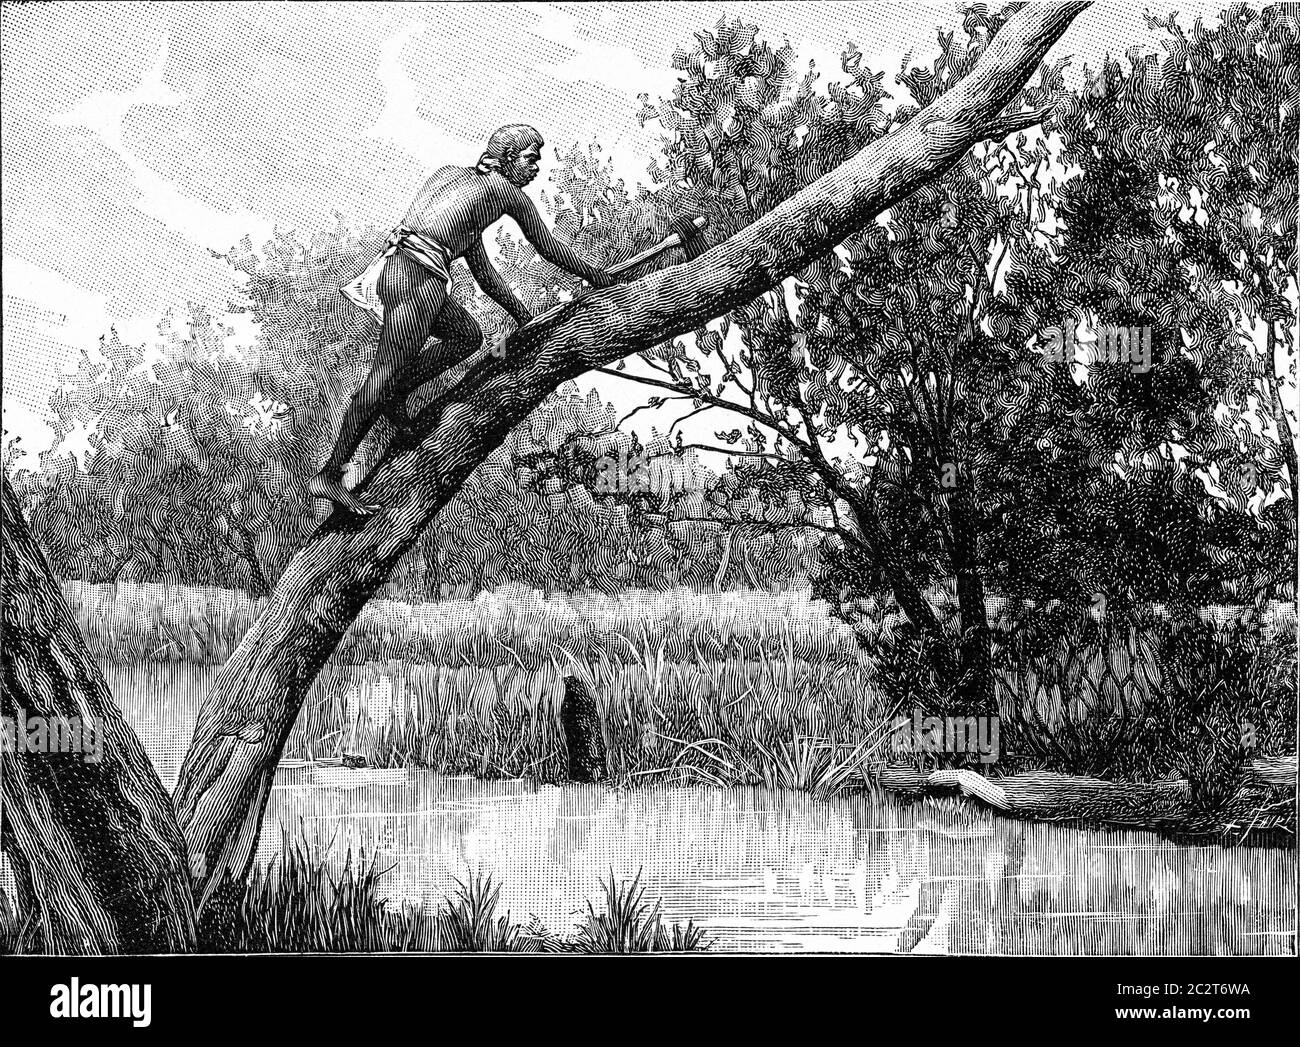 Australian climbing along a tree, vintage engraved illustration. From the Universe and Humanity, 1910. Stock Photo